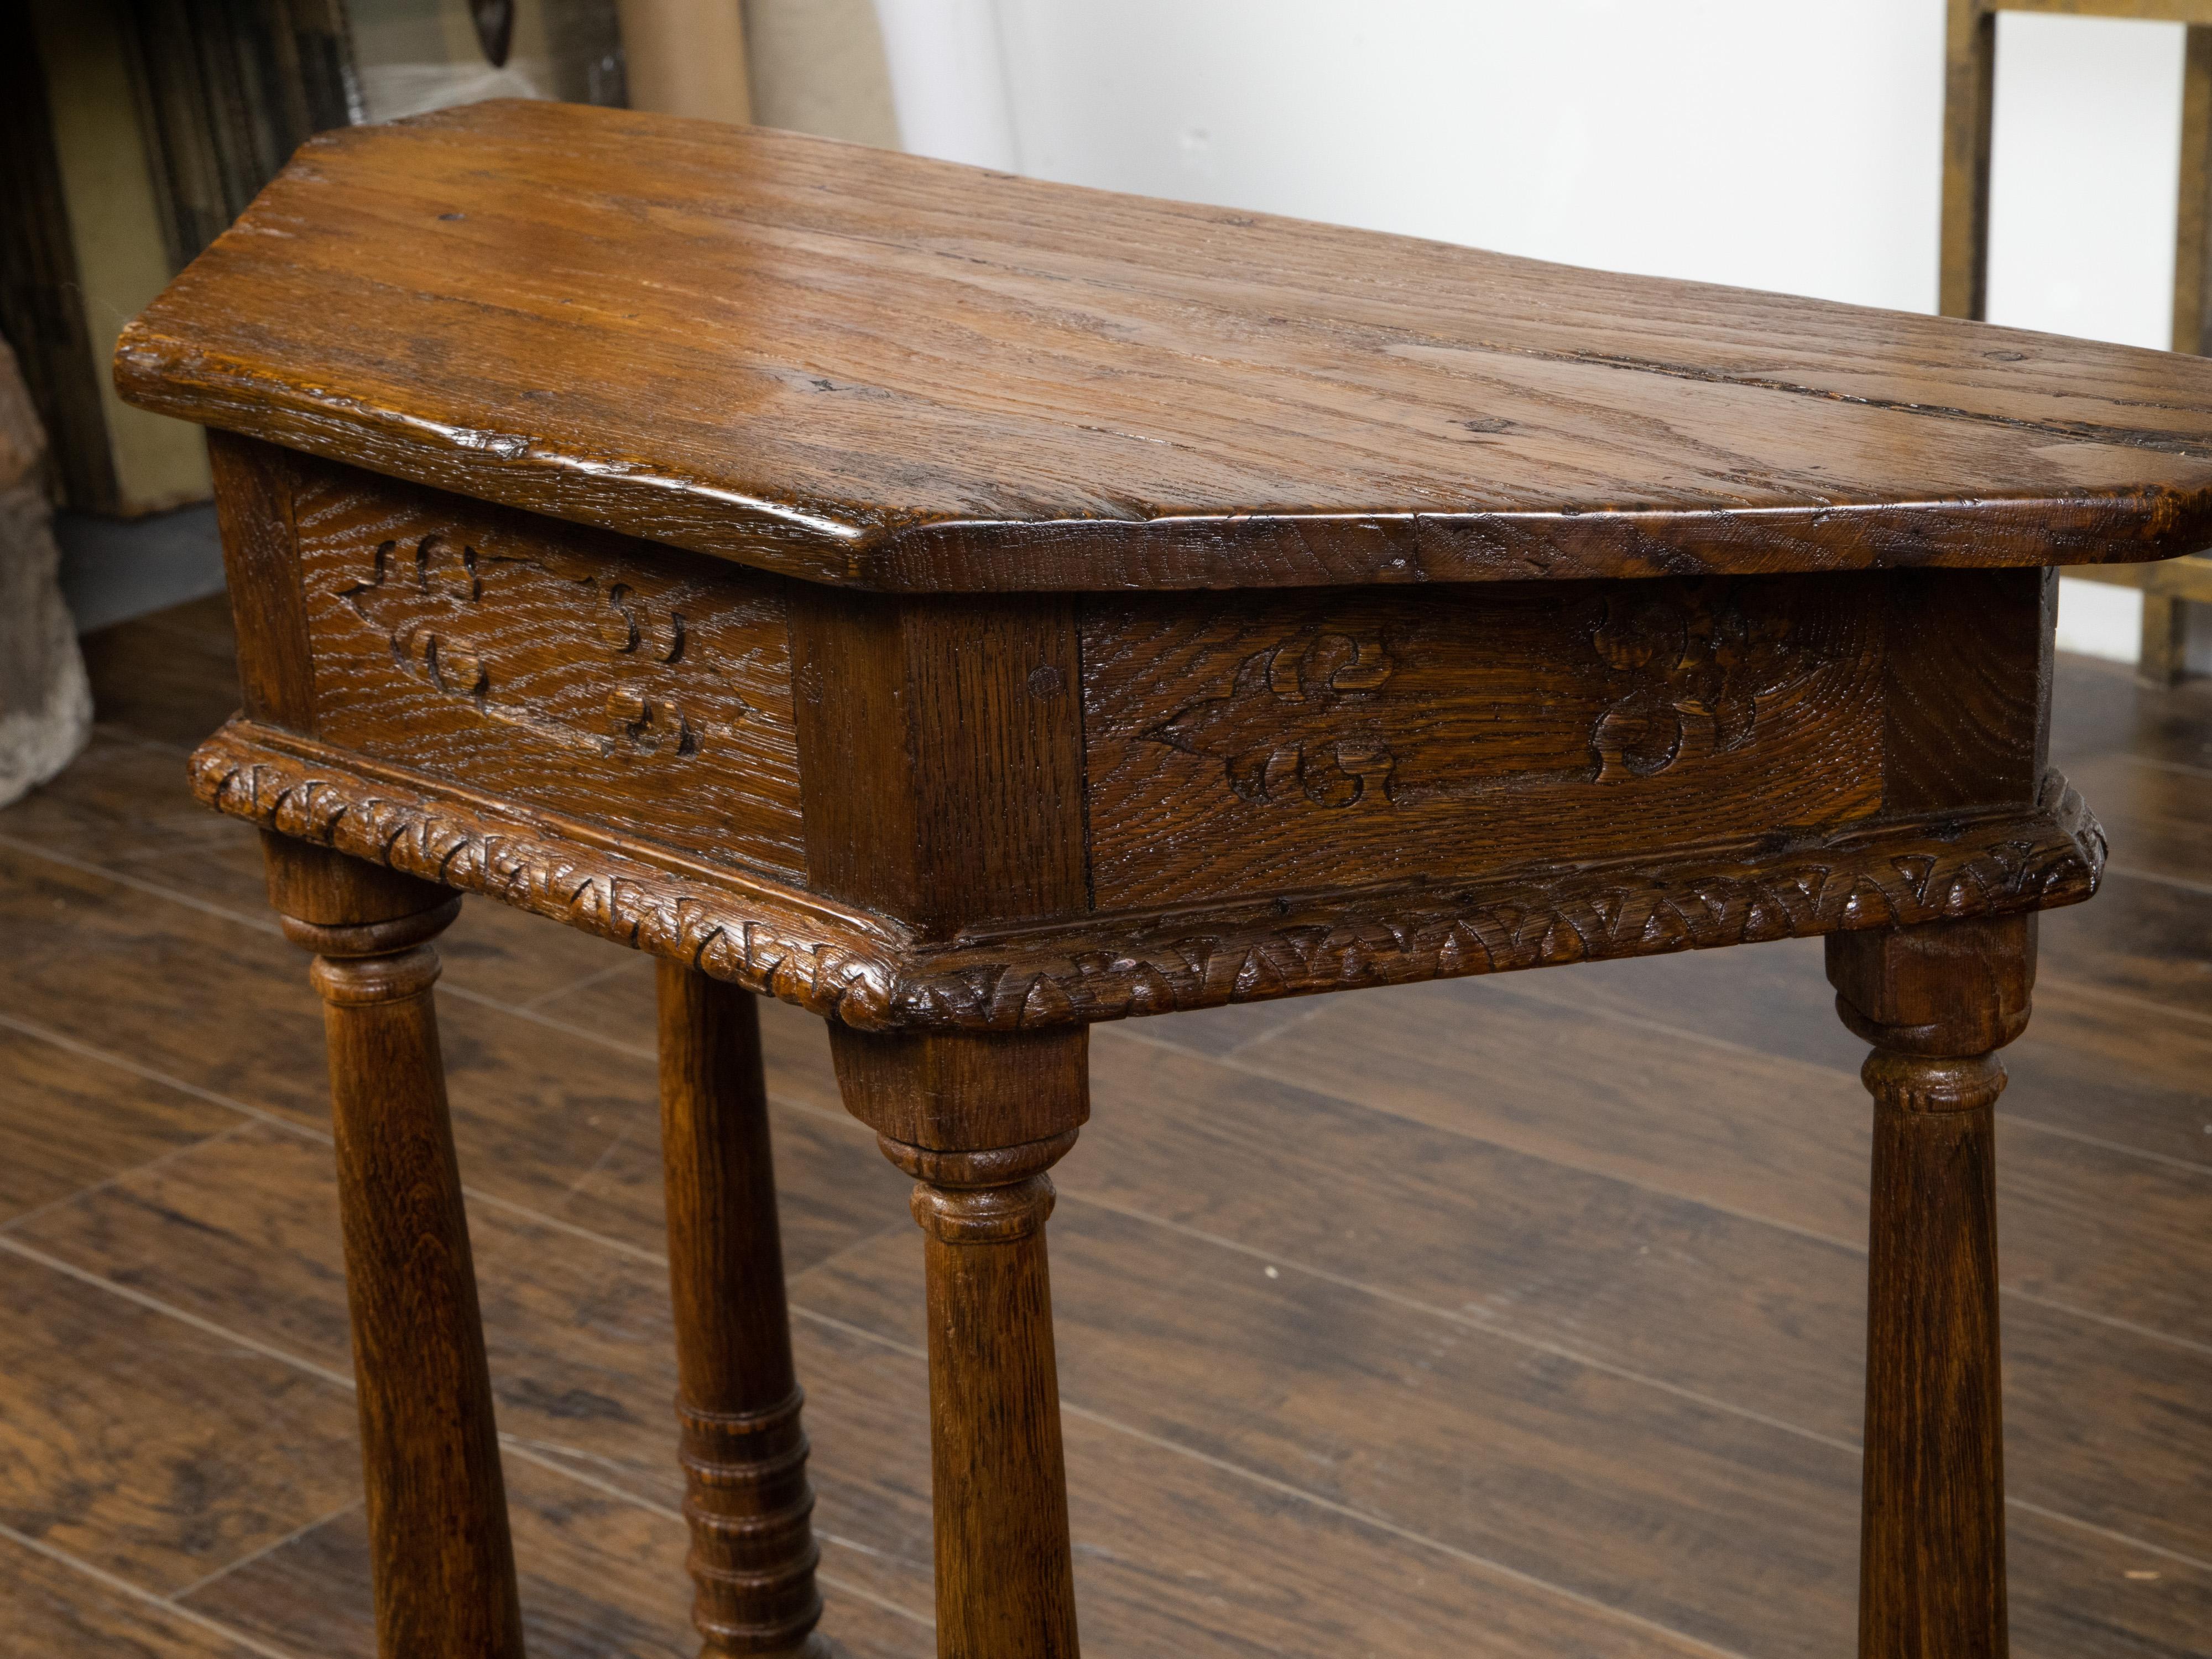 Pair of 19th Century English Carved Oak Demilune Tables with Column Legs For Sale 8